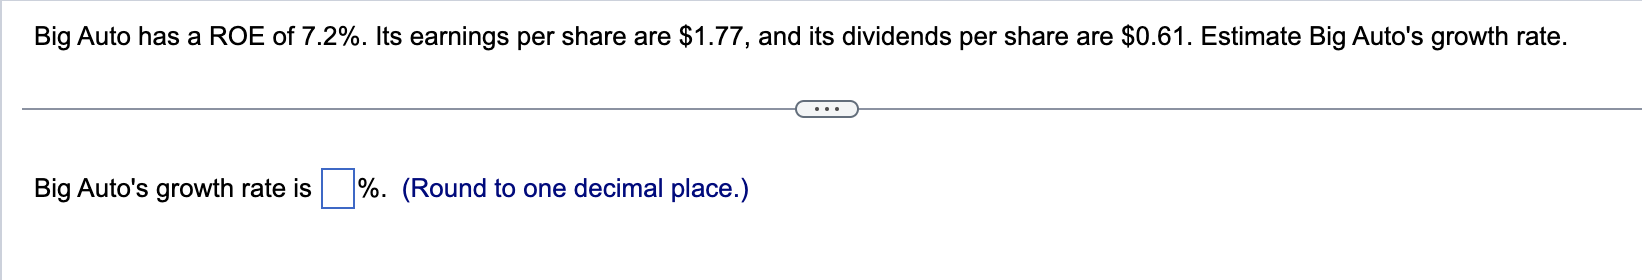 Big Auto has a ROE of 7.2%. Its earnings per share are $1.77, and its dividends per share are $0.61. Estimate